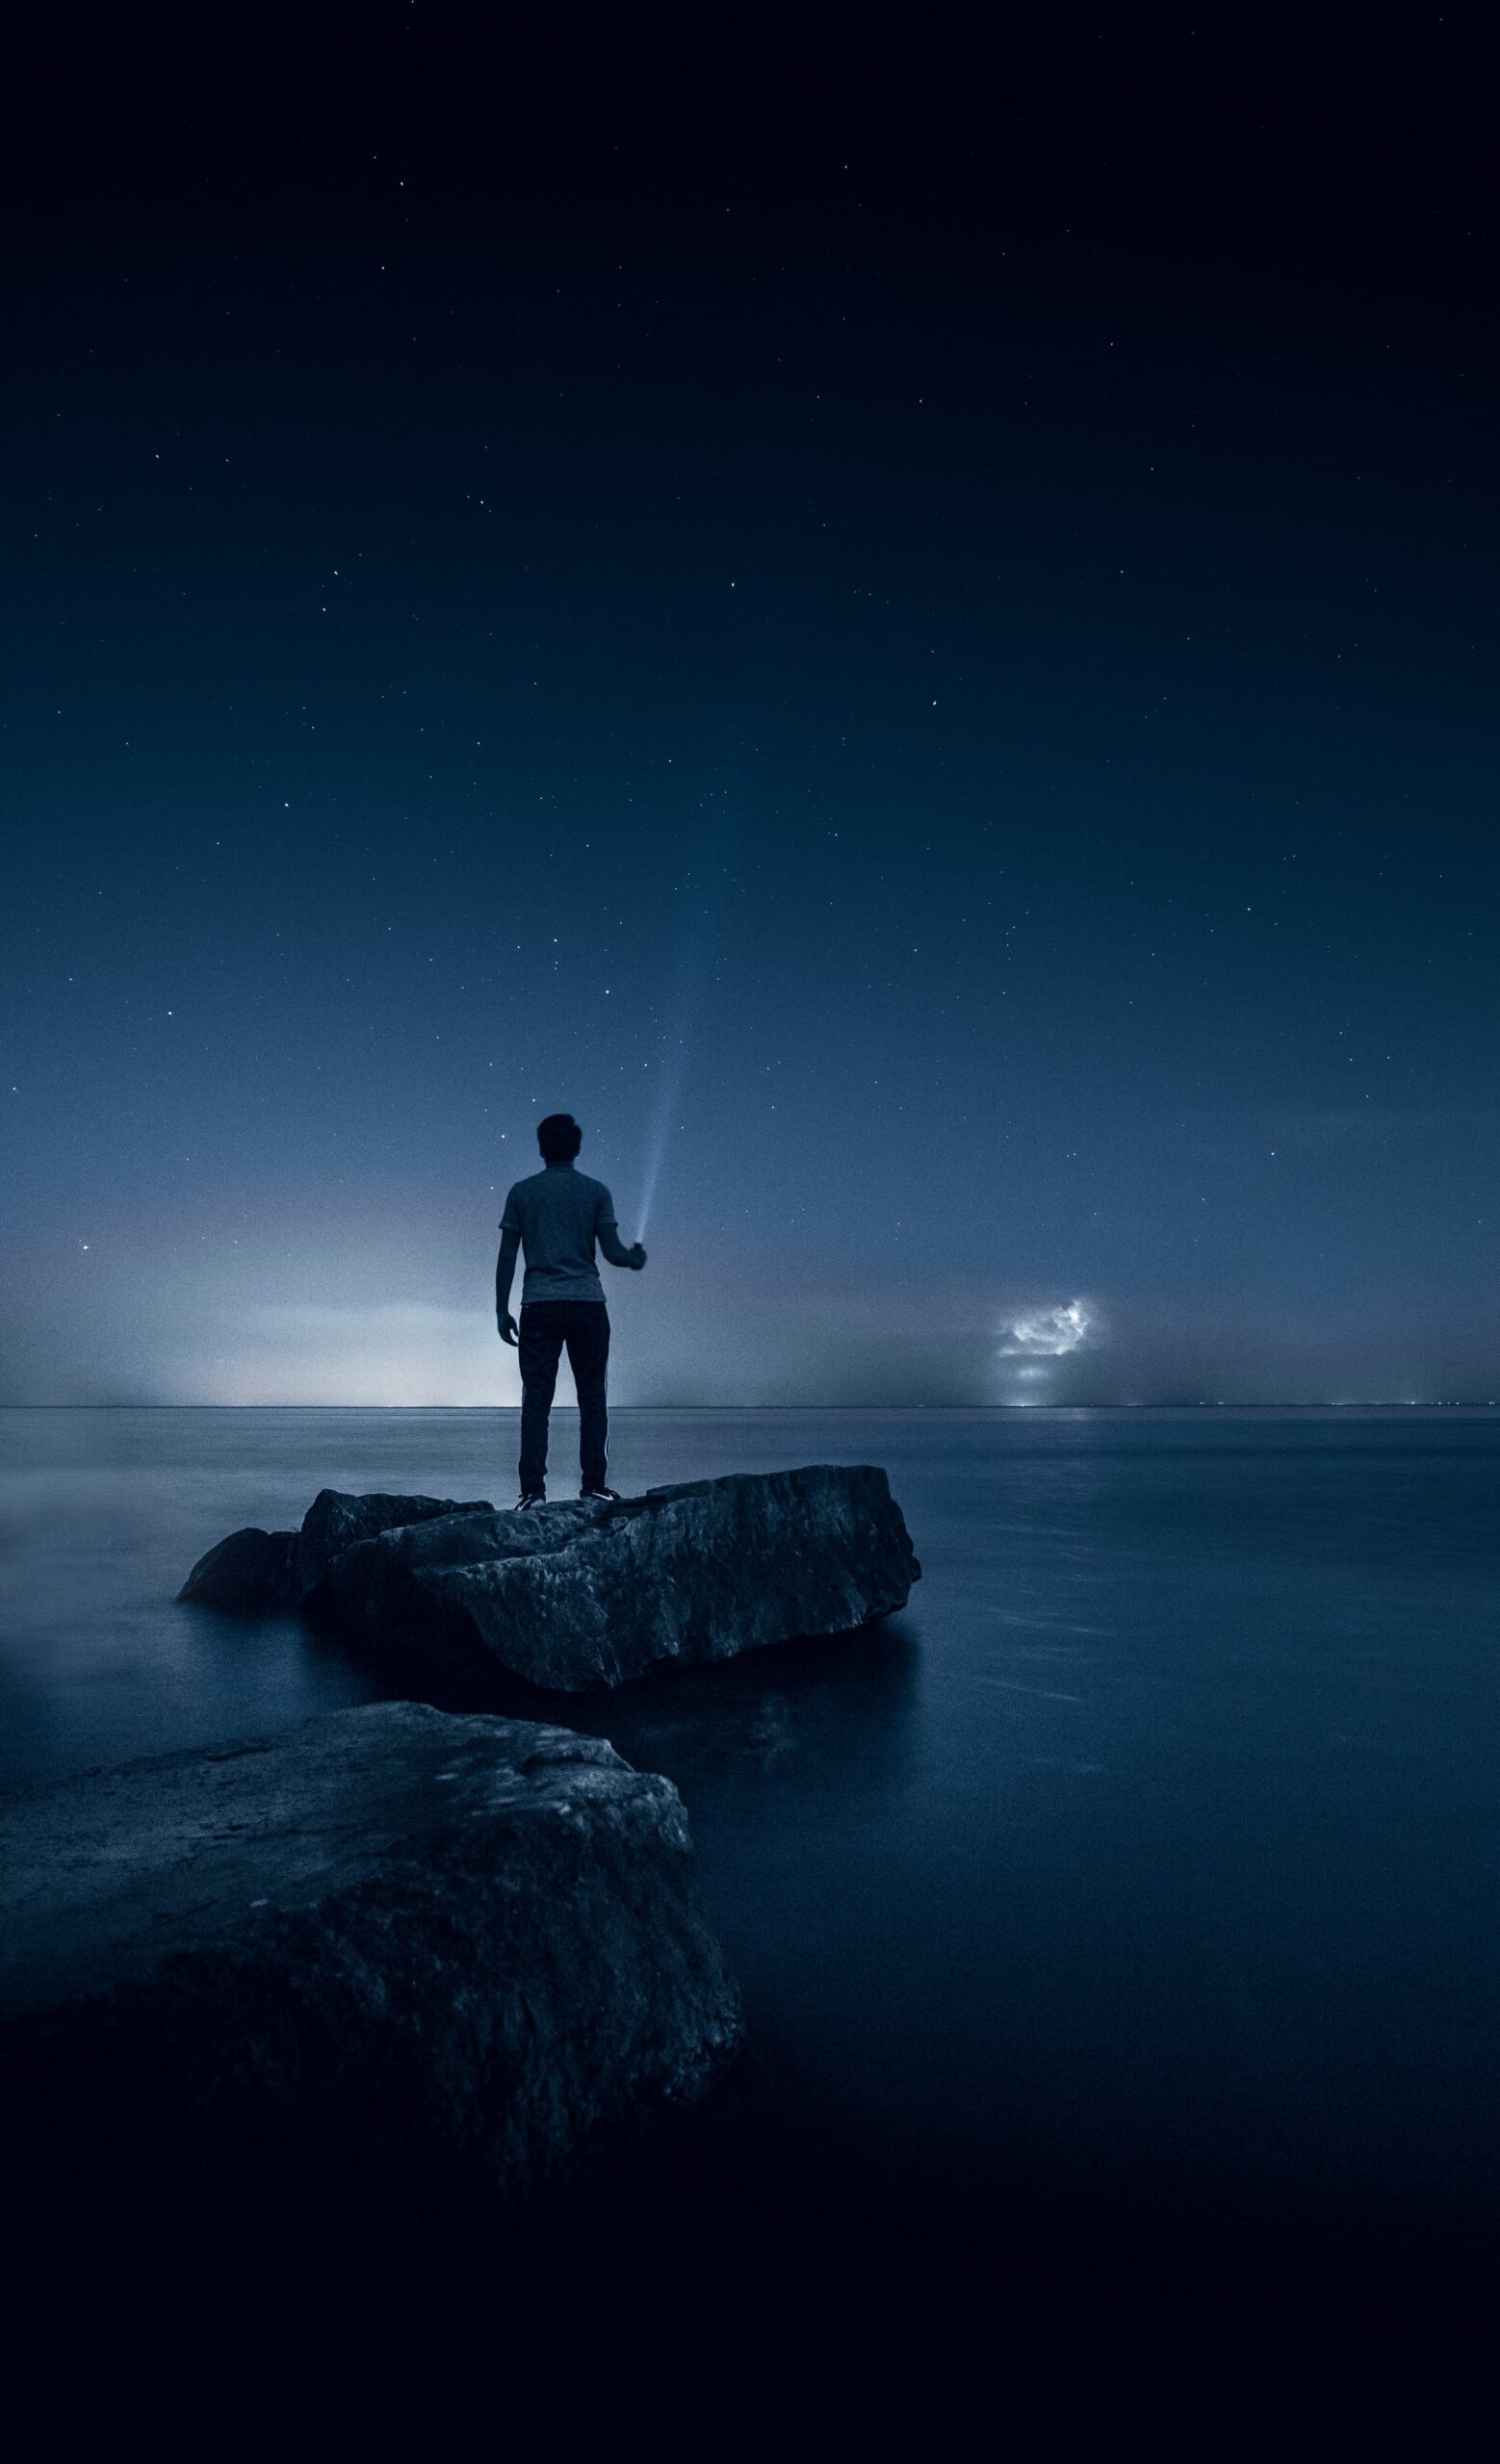 man holding flashlight, standing in boat on water at night